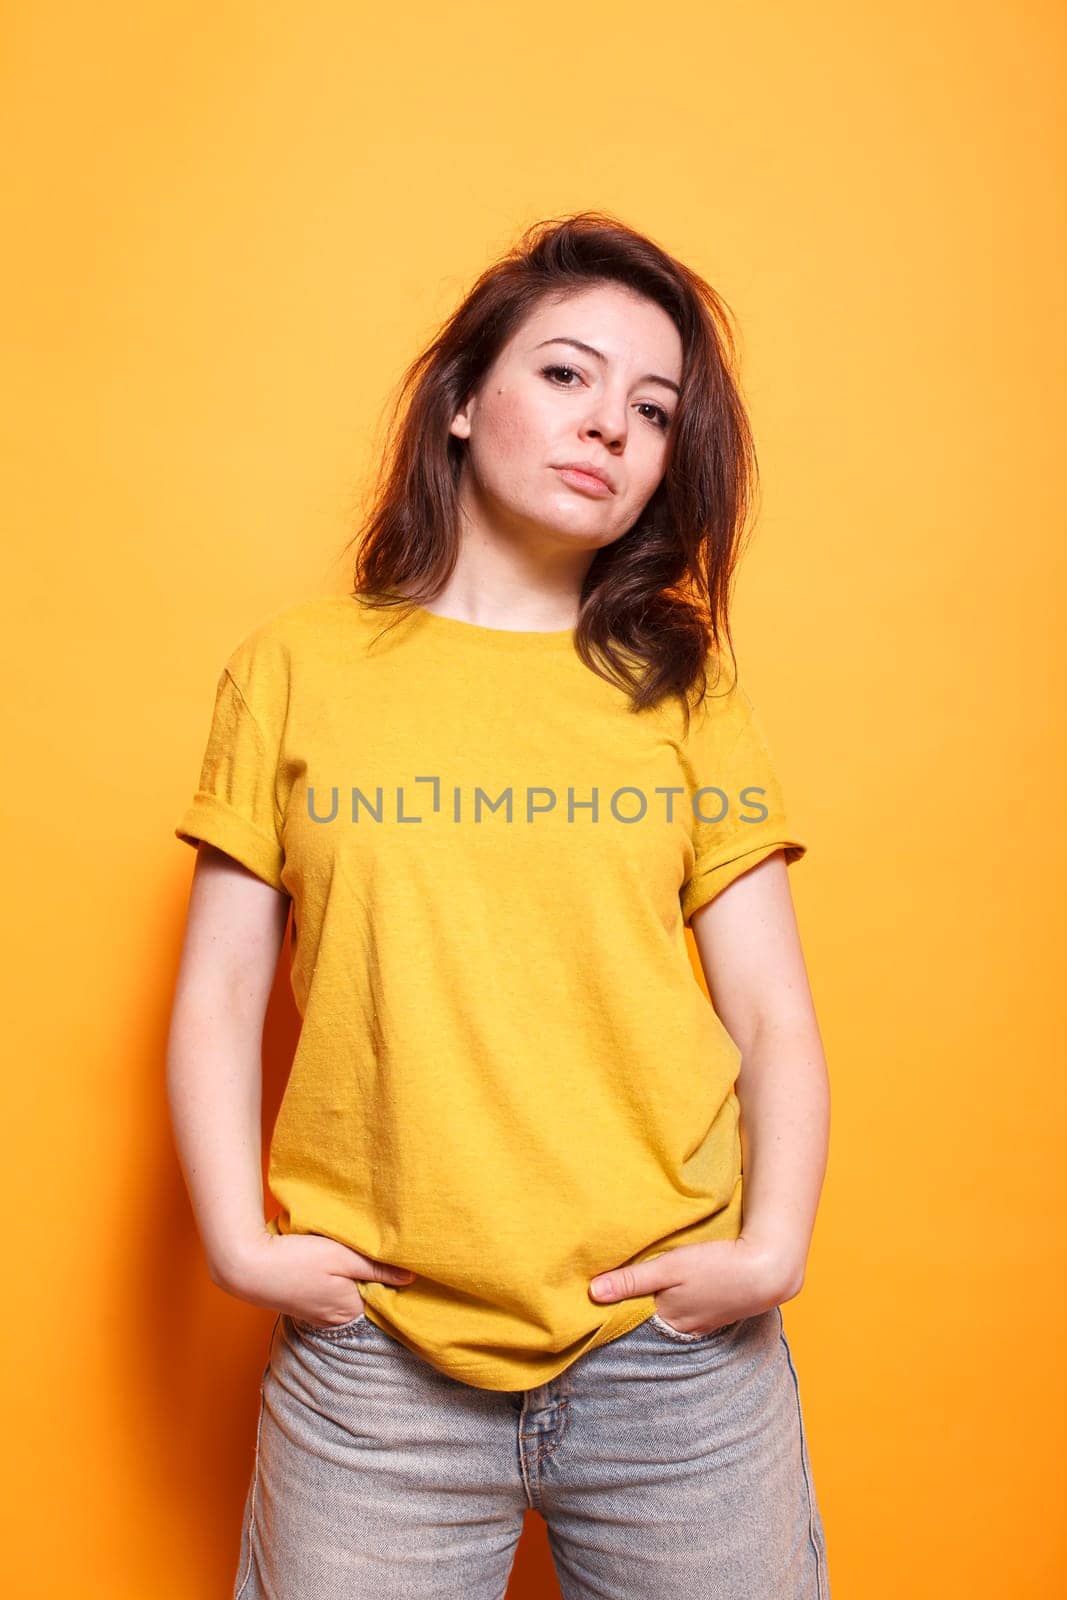 Confident woman with hands in pocket, brown hair, and casual clothing stands against an isolated orange background. Her expressive eyes and friendly demeanor are captivating.